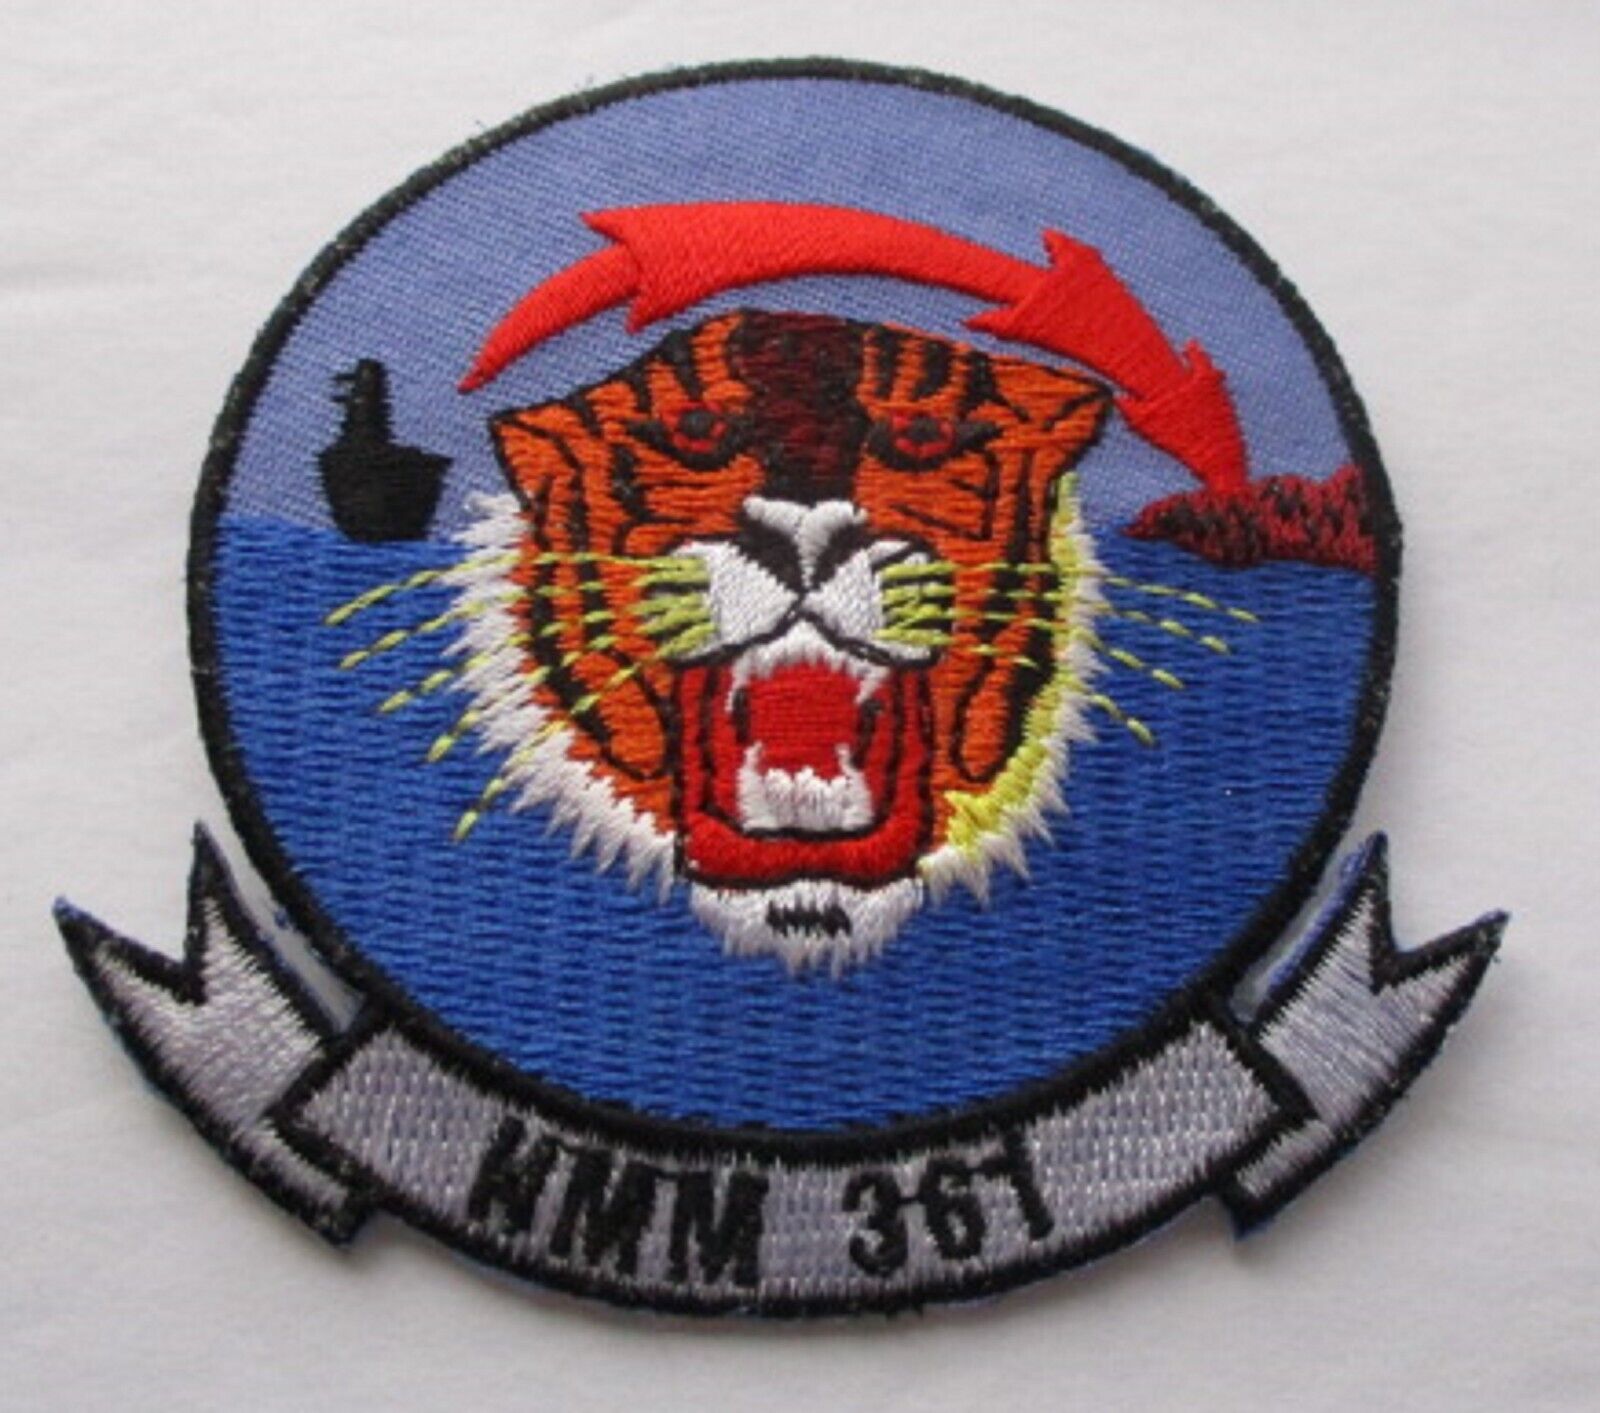 UNITED STATES AIR FORCE U.S.A.F. THE FLYING TIGERS HMM 361 PATCH